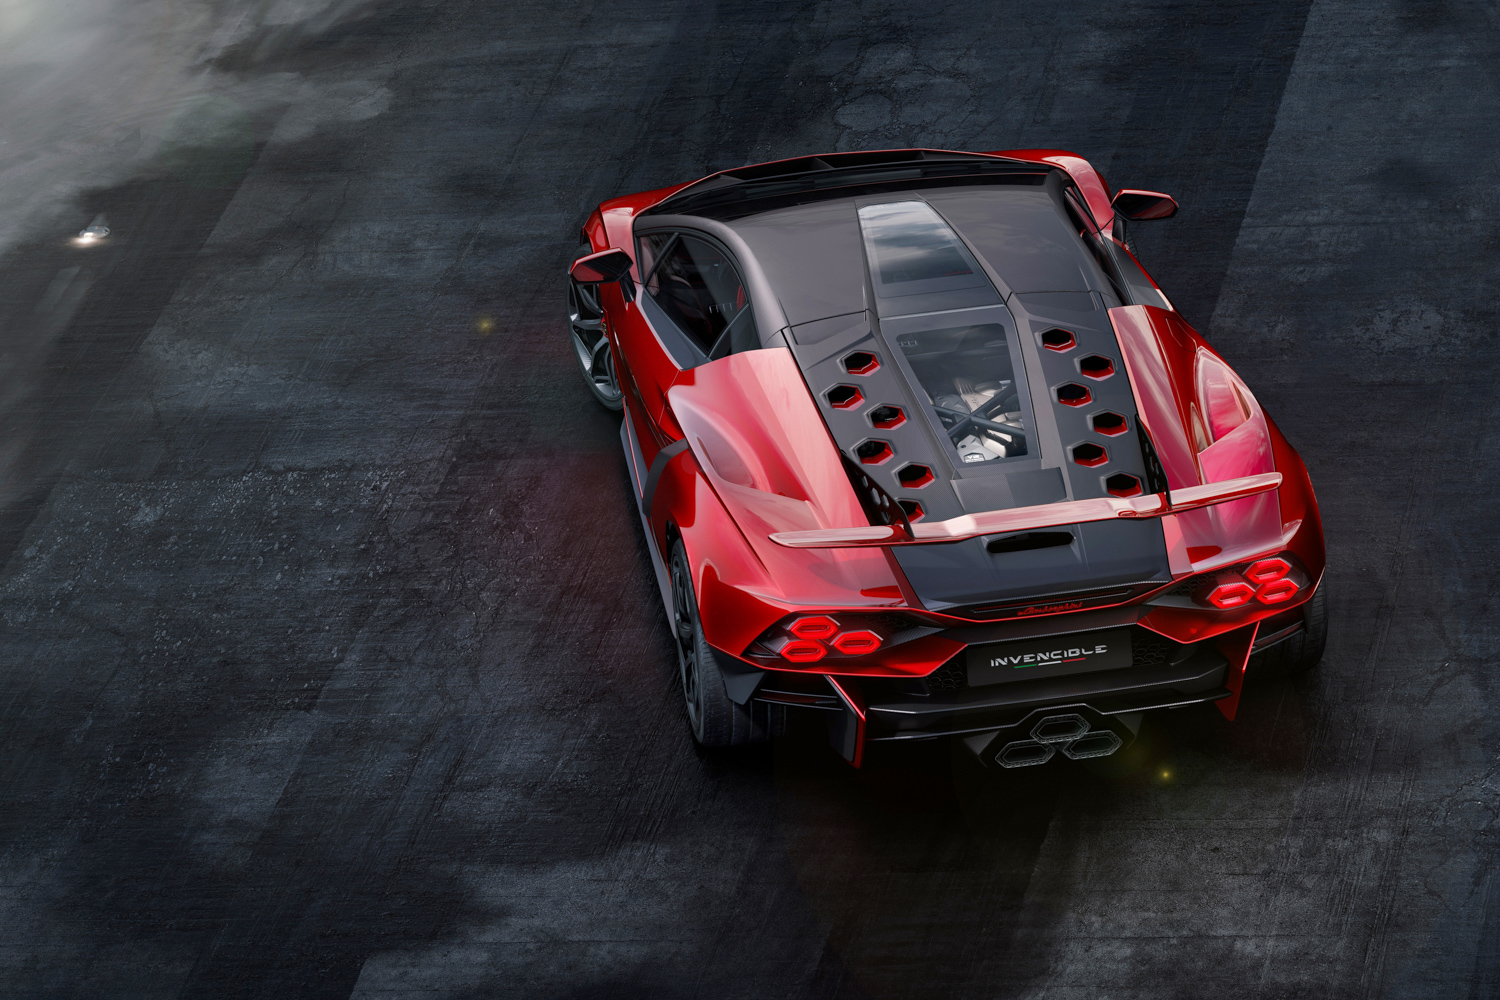 Lamborghini sees out V12 era with two one-off specials